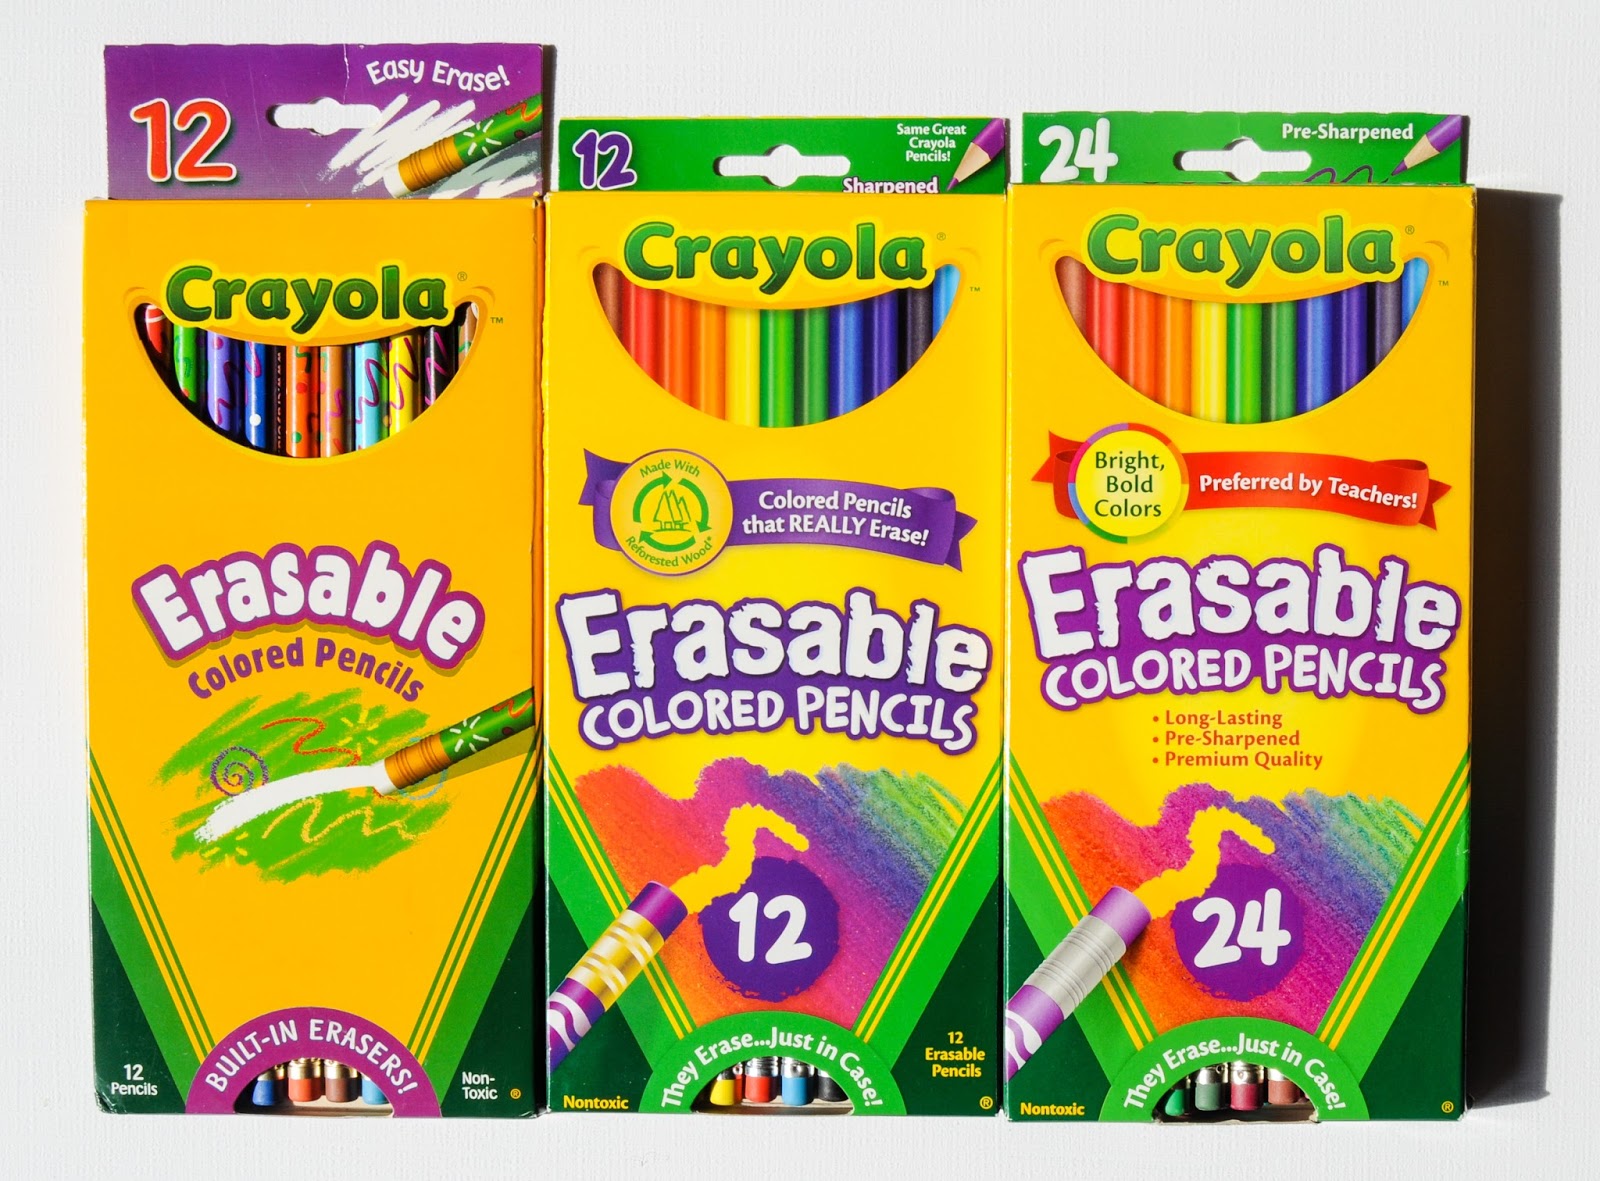 Erasable Colored Pencils: What's Inside the Box